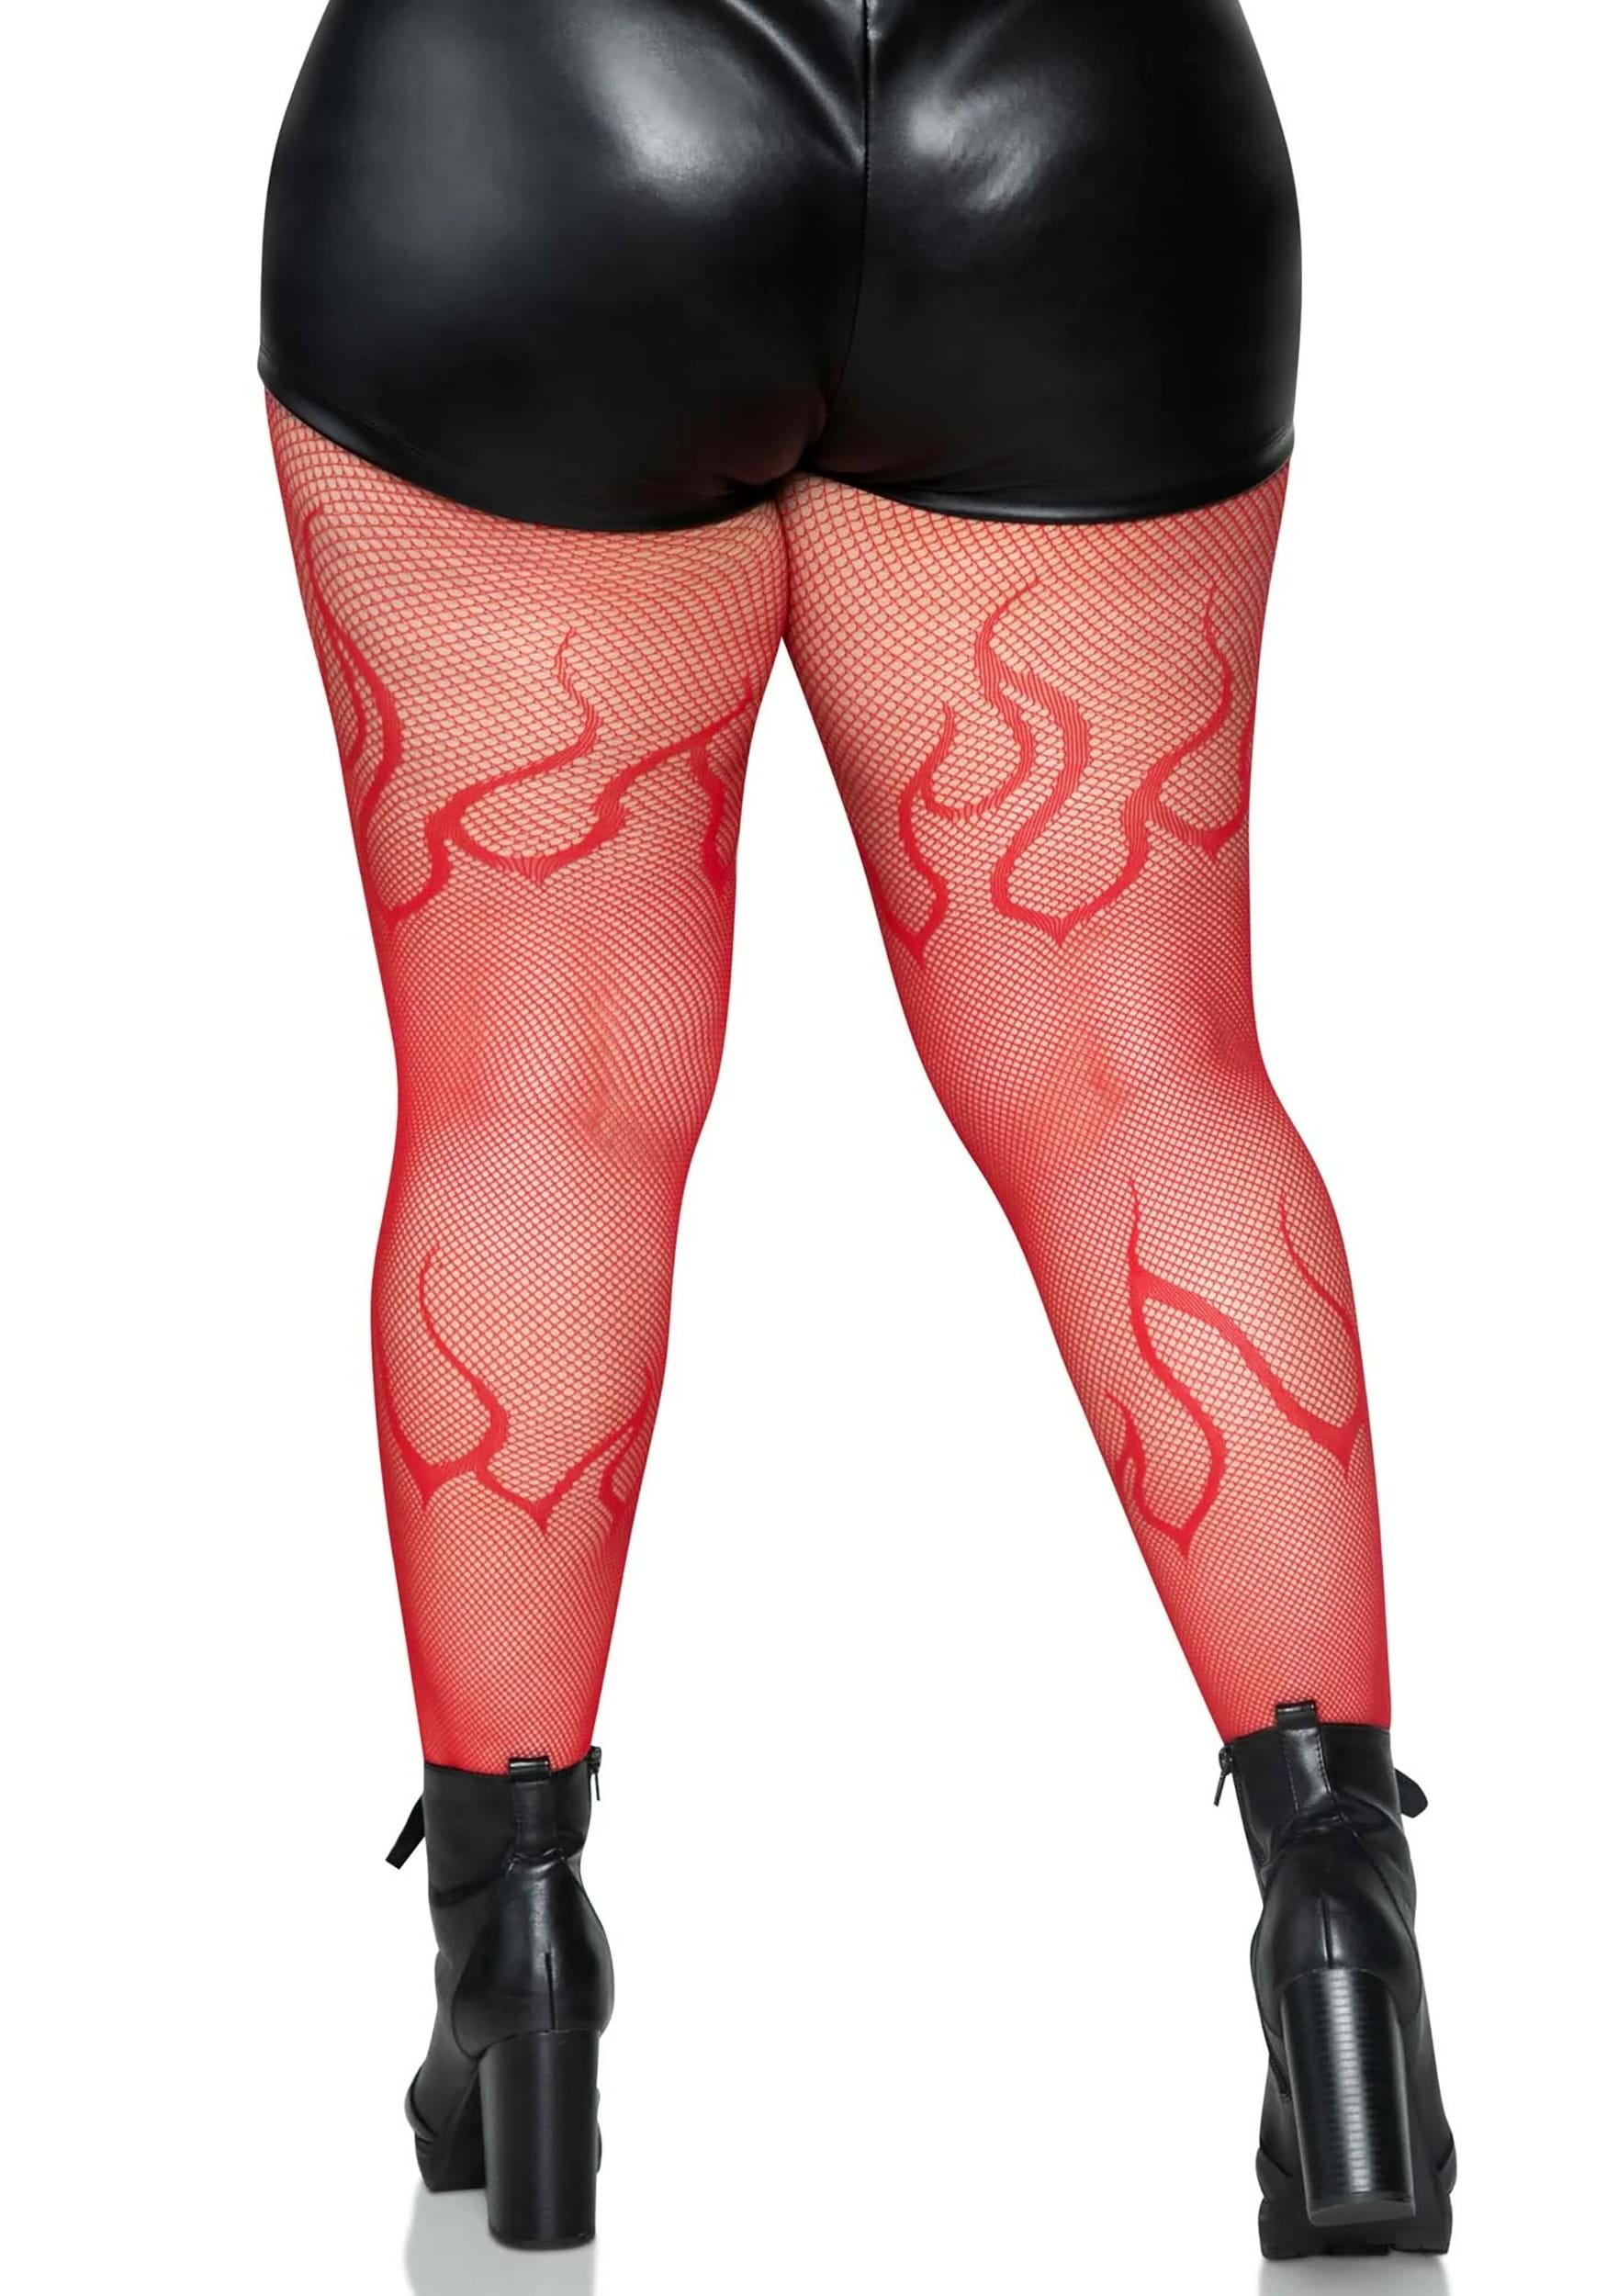 Orange Fishnet Tights for Women Mesh Tights Available in Plus Size. 